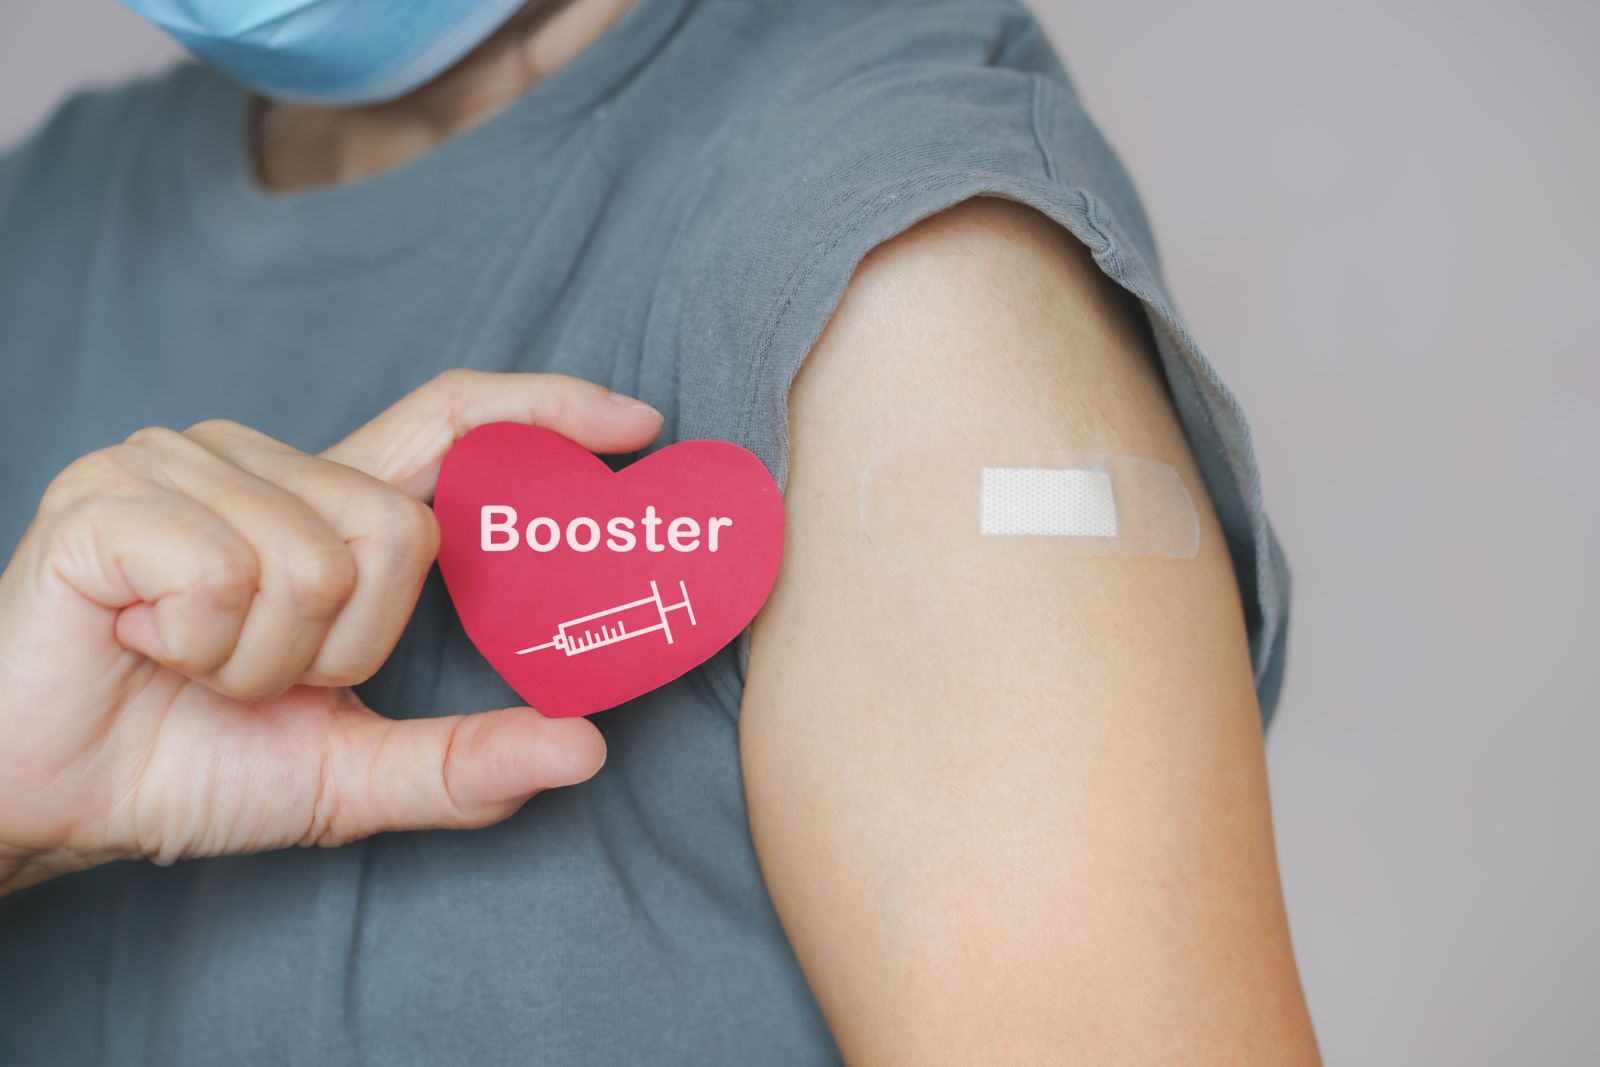 Third Booster Dose of the COVID-19 Vaccine